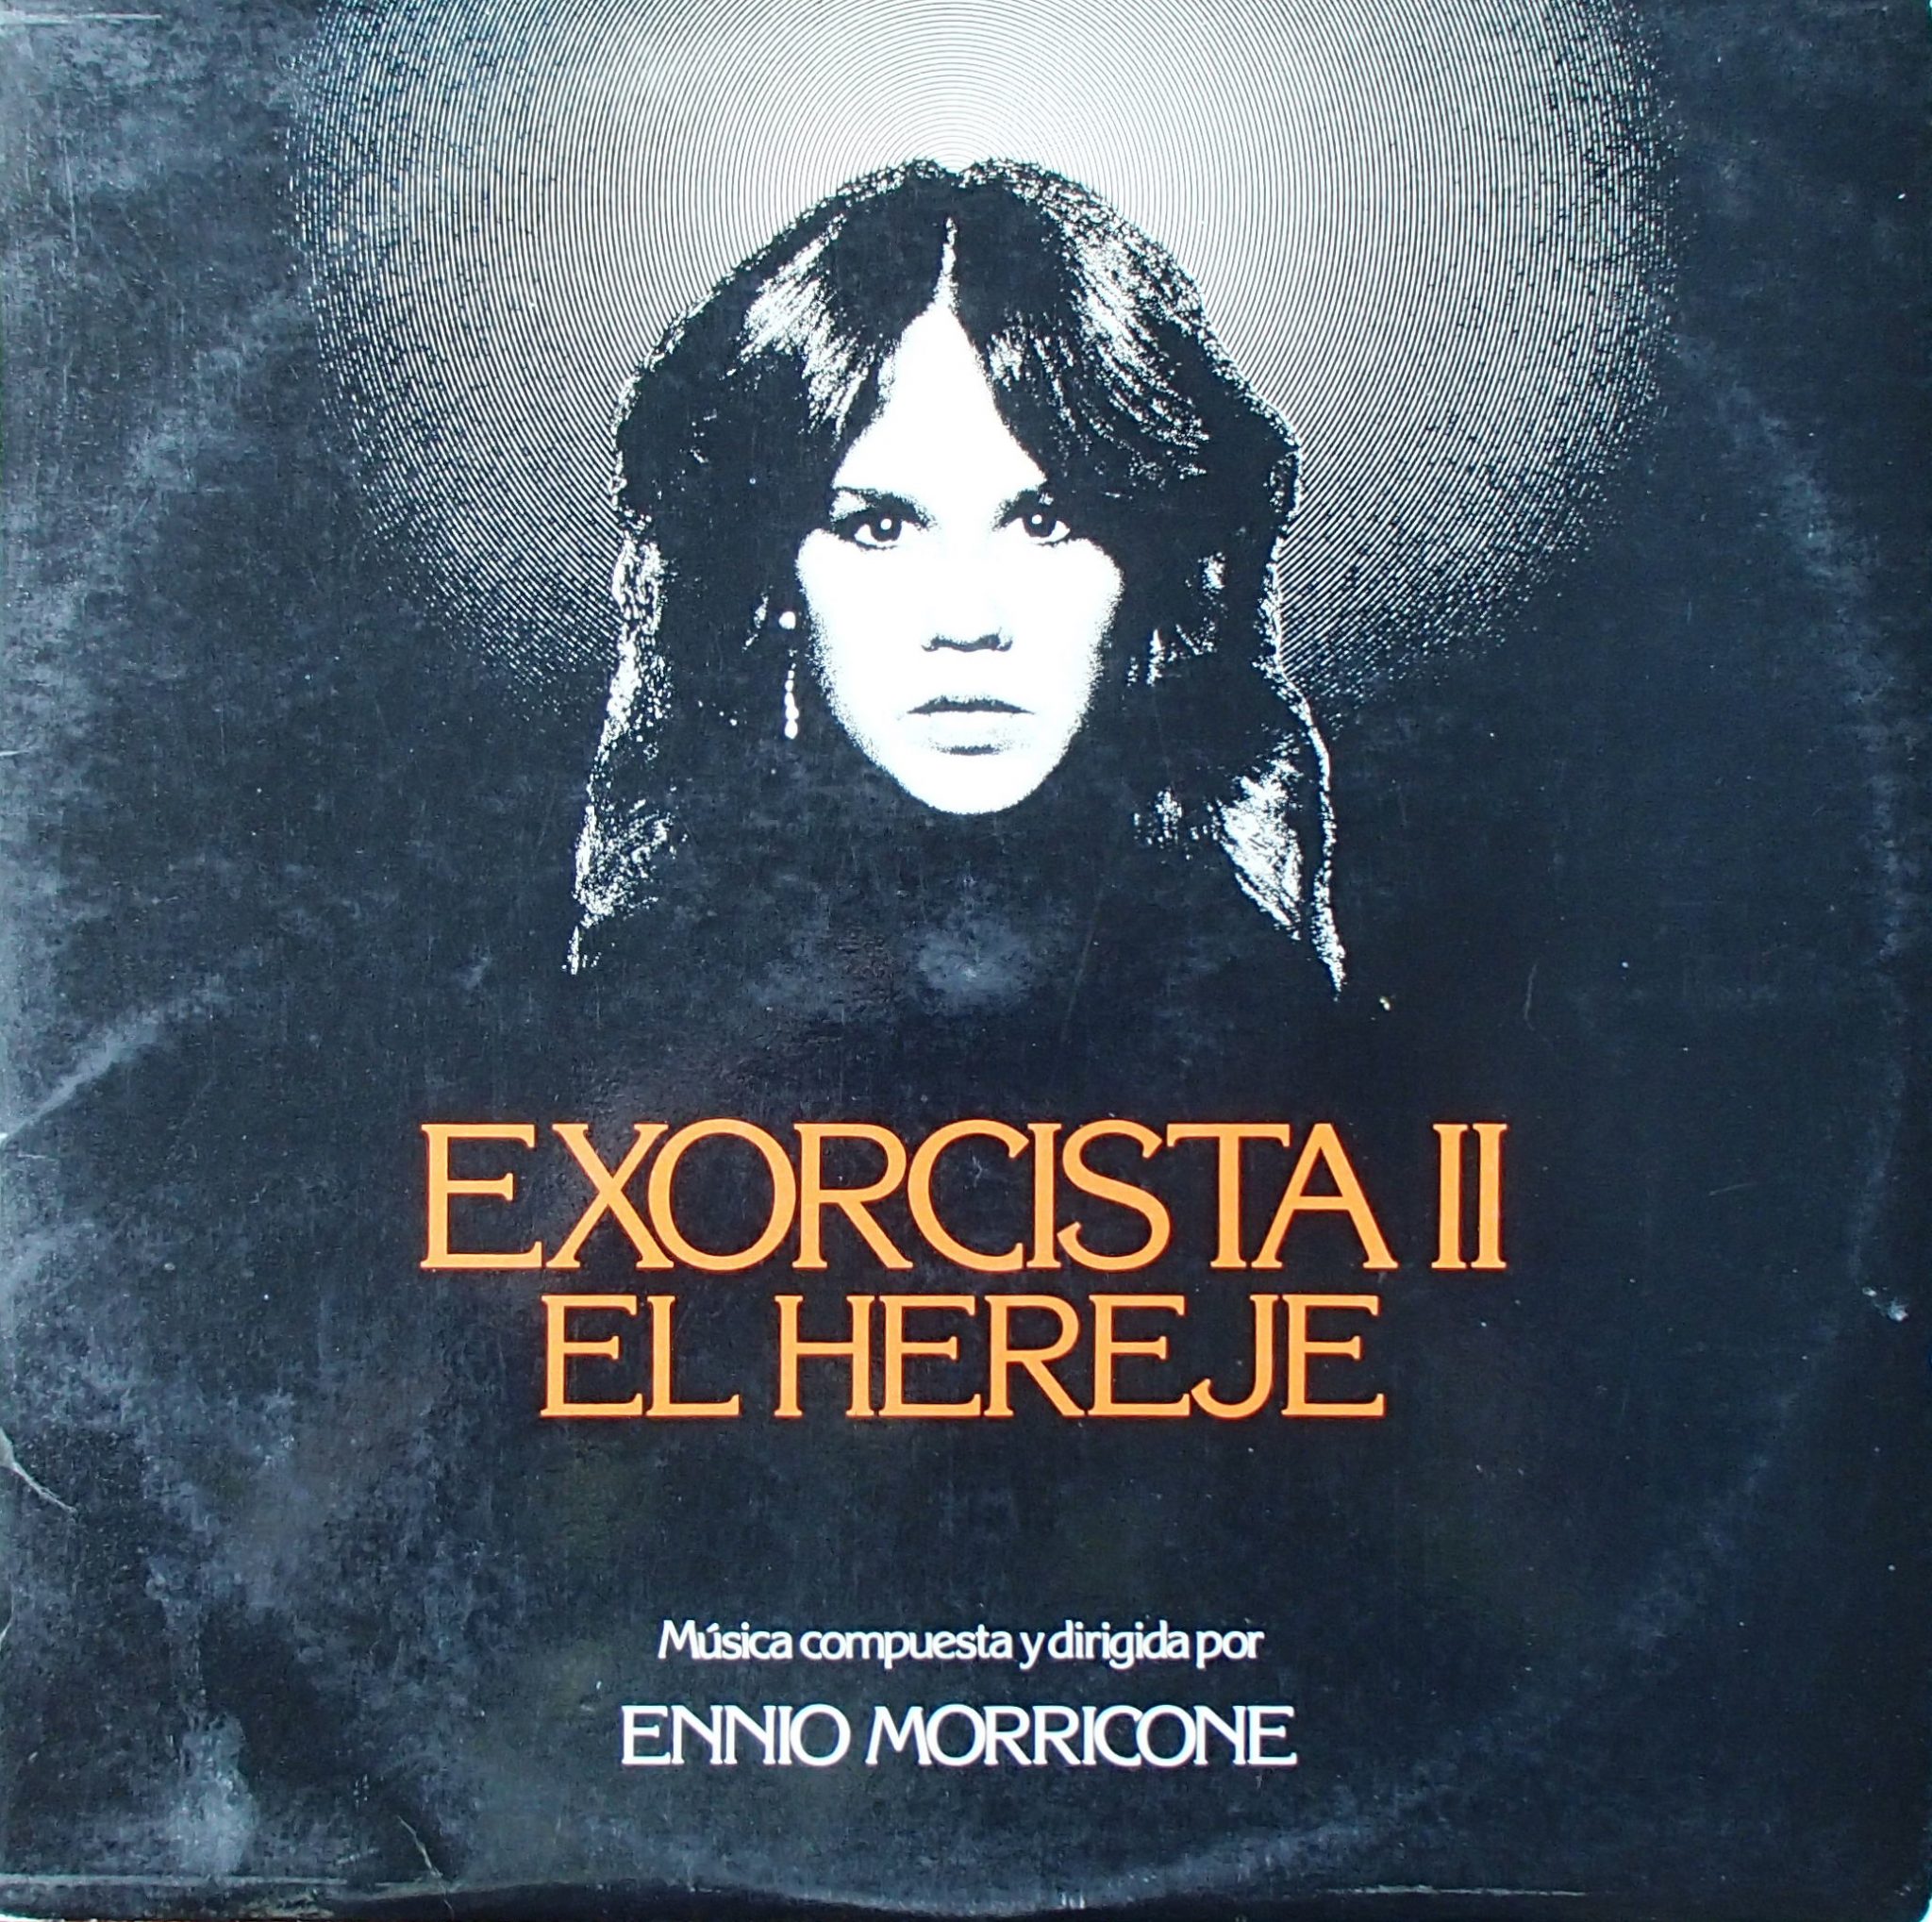 Exorcist II: The Heretic : - original soundtrack buy it online at the ...